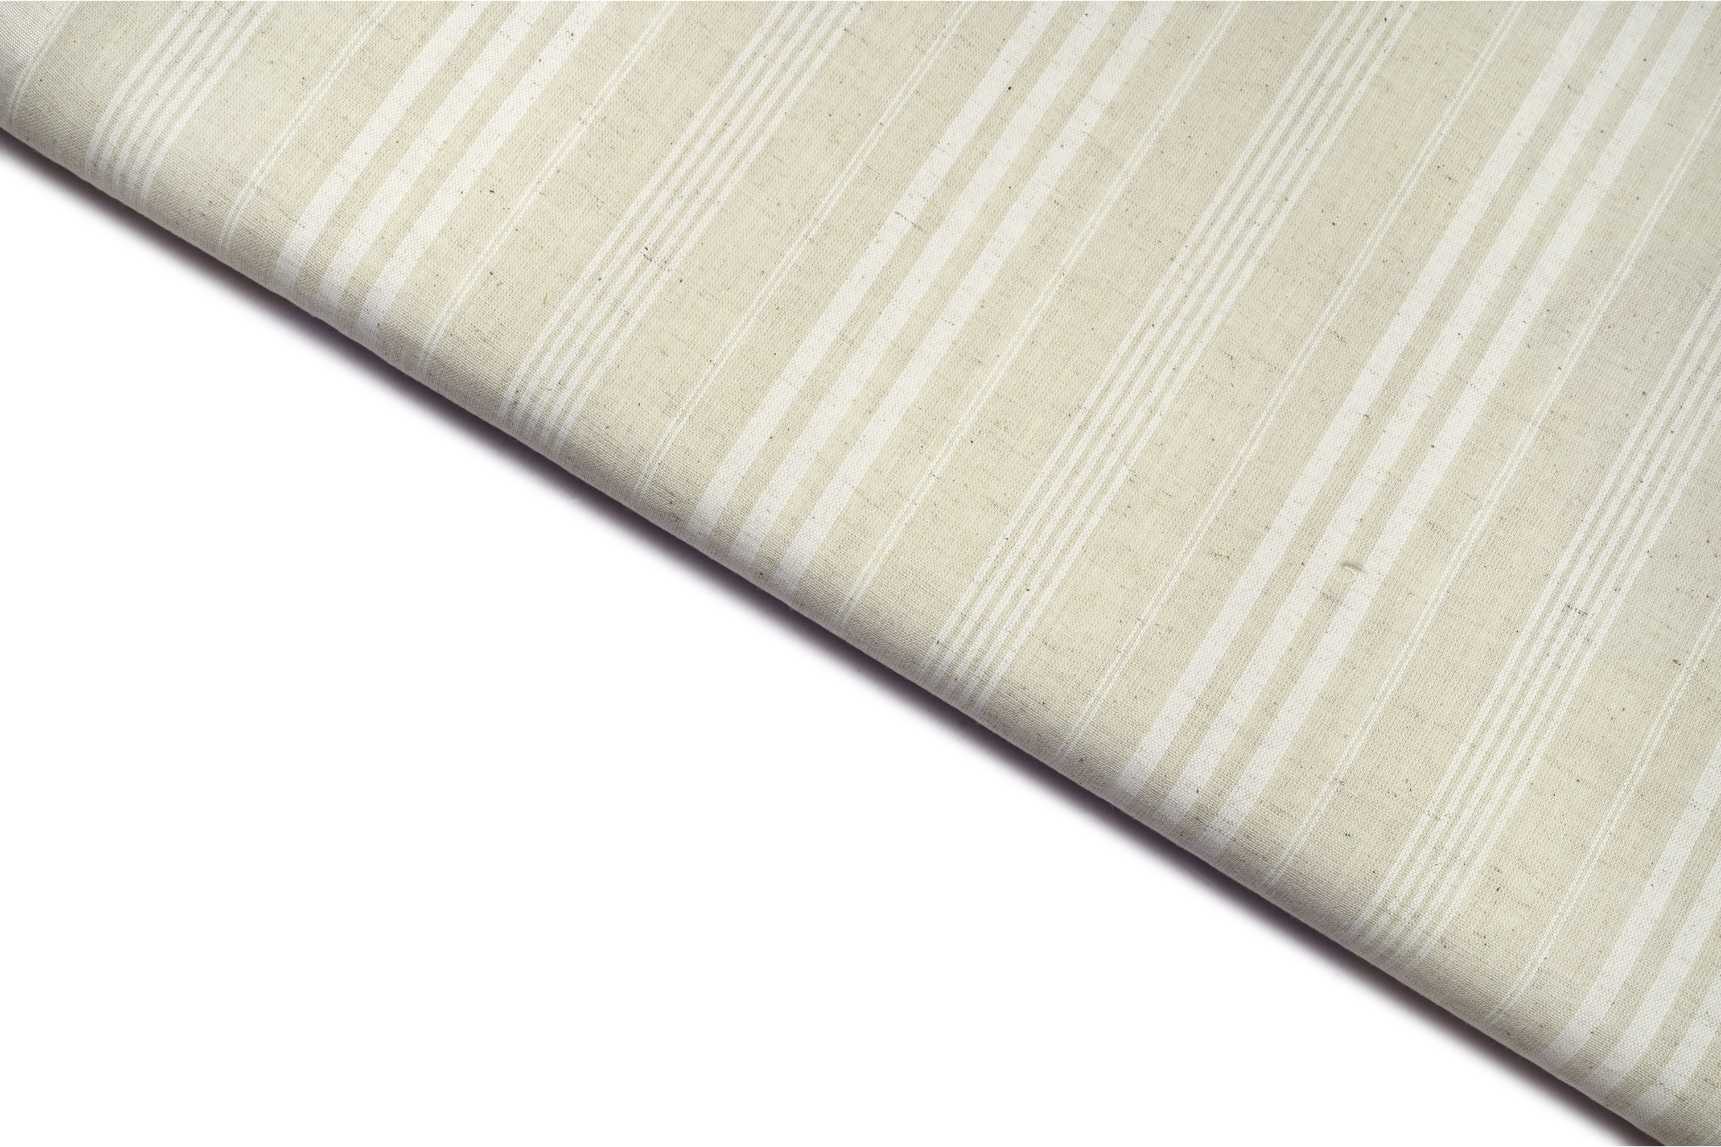 ZOOT CREAM COLOR TUSSER WEAVE LINES PATTERN SOUTH COTTON HANDLOOM FABRIC 11675